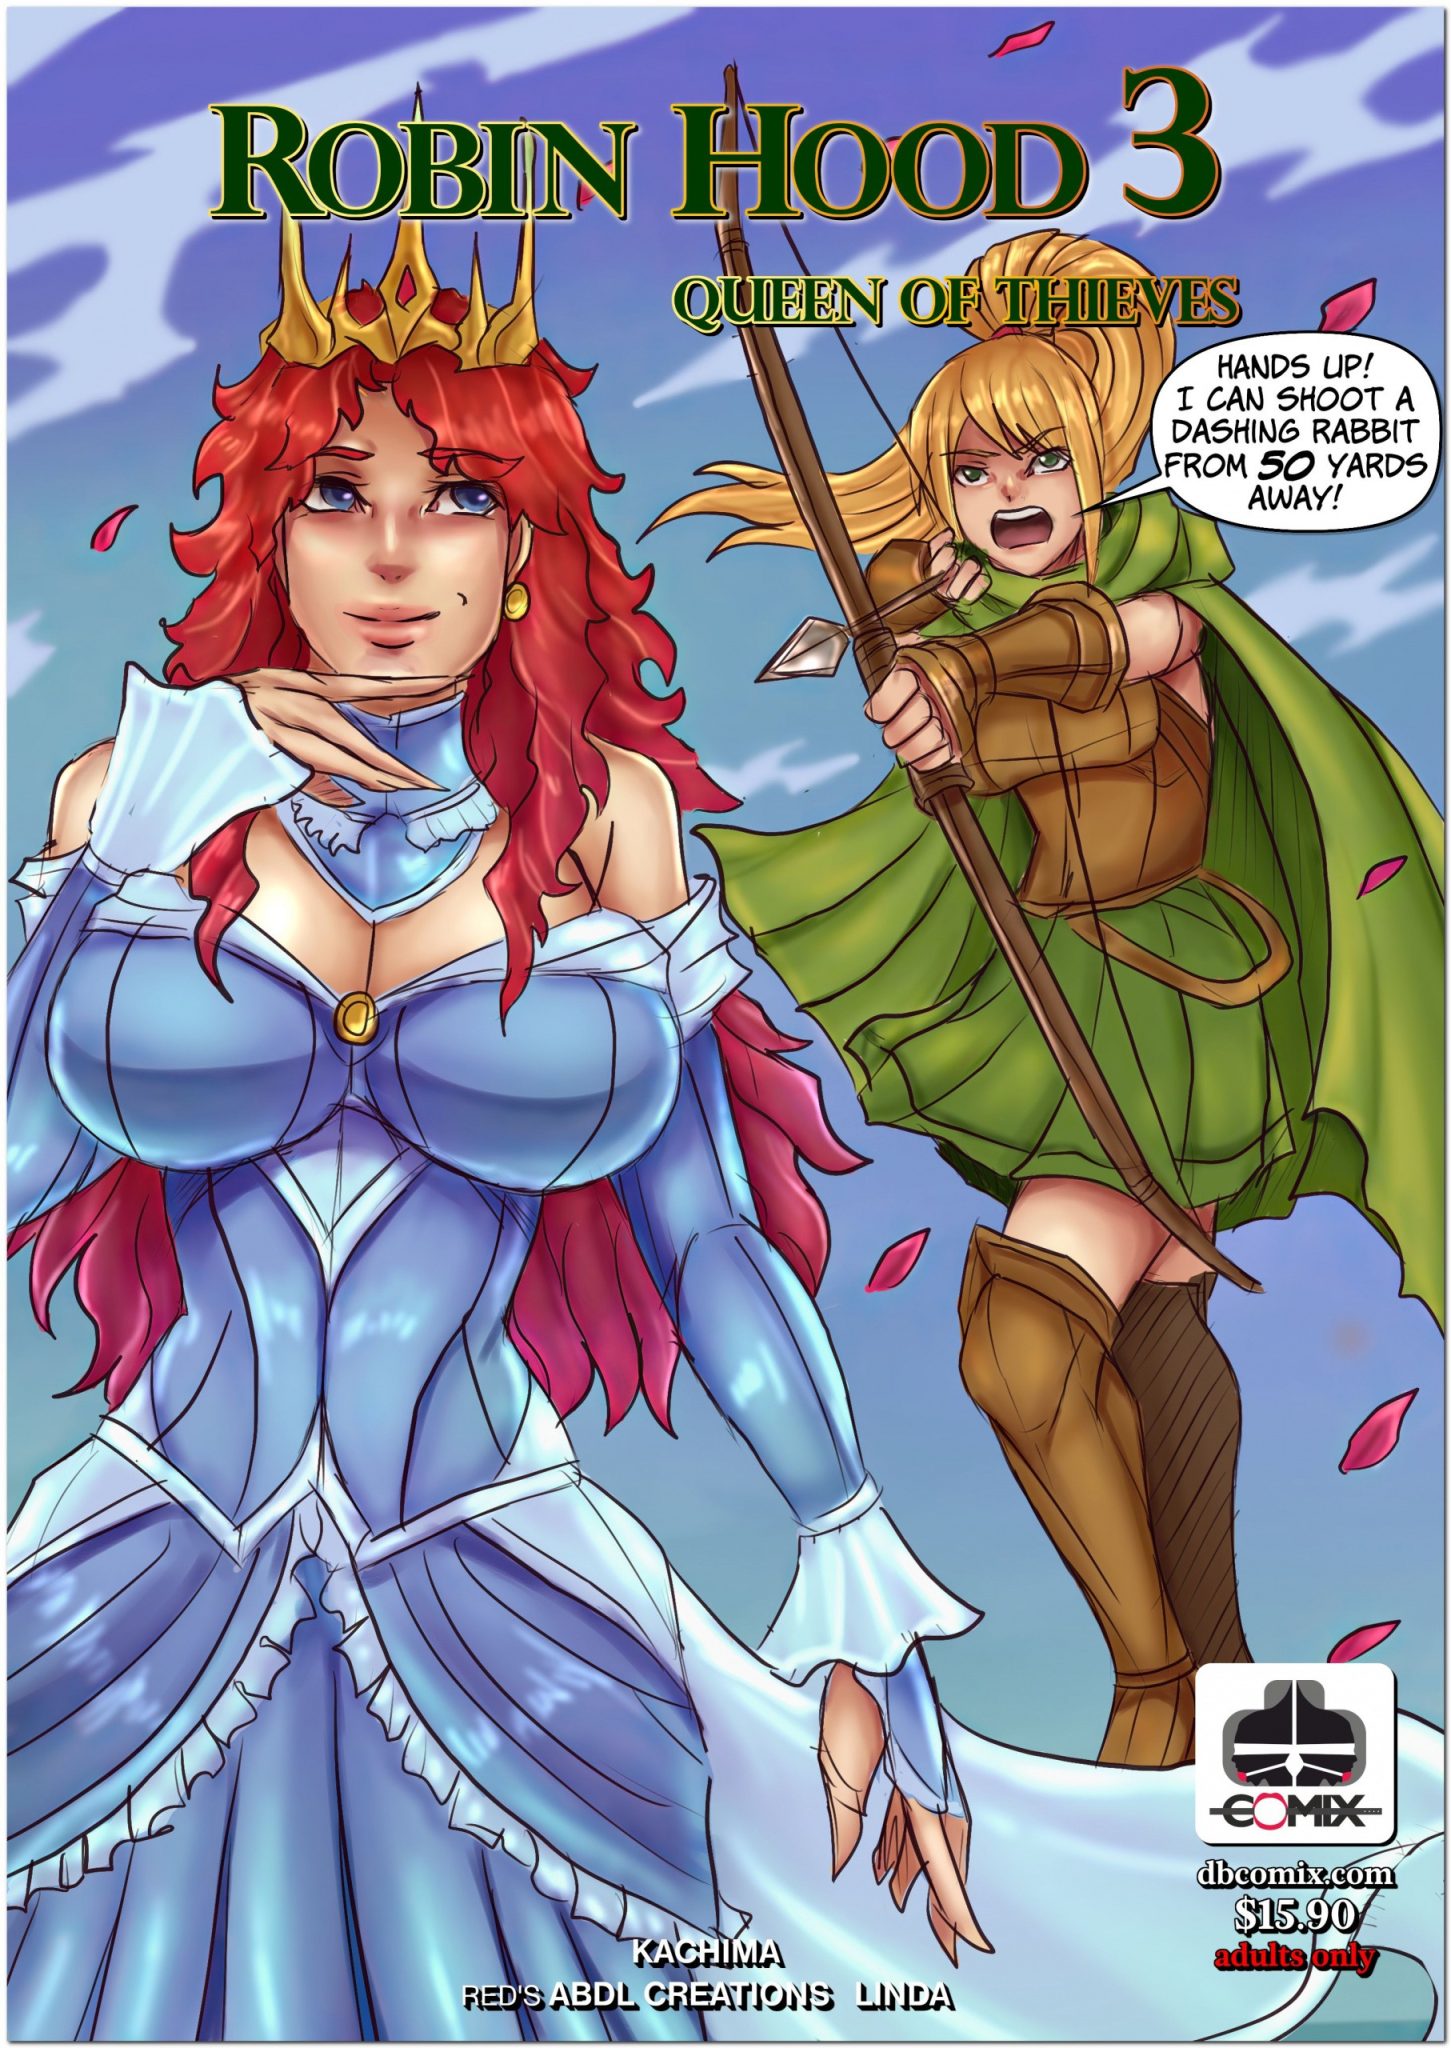 Robin Hood the Queen of Thieves 3